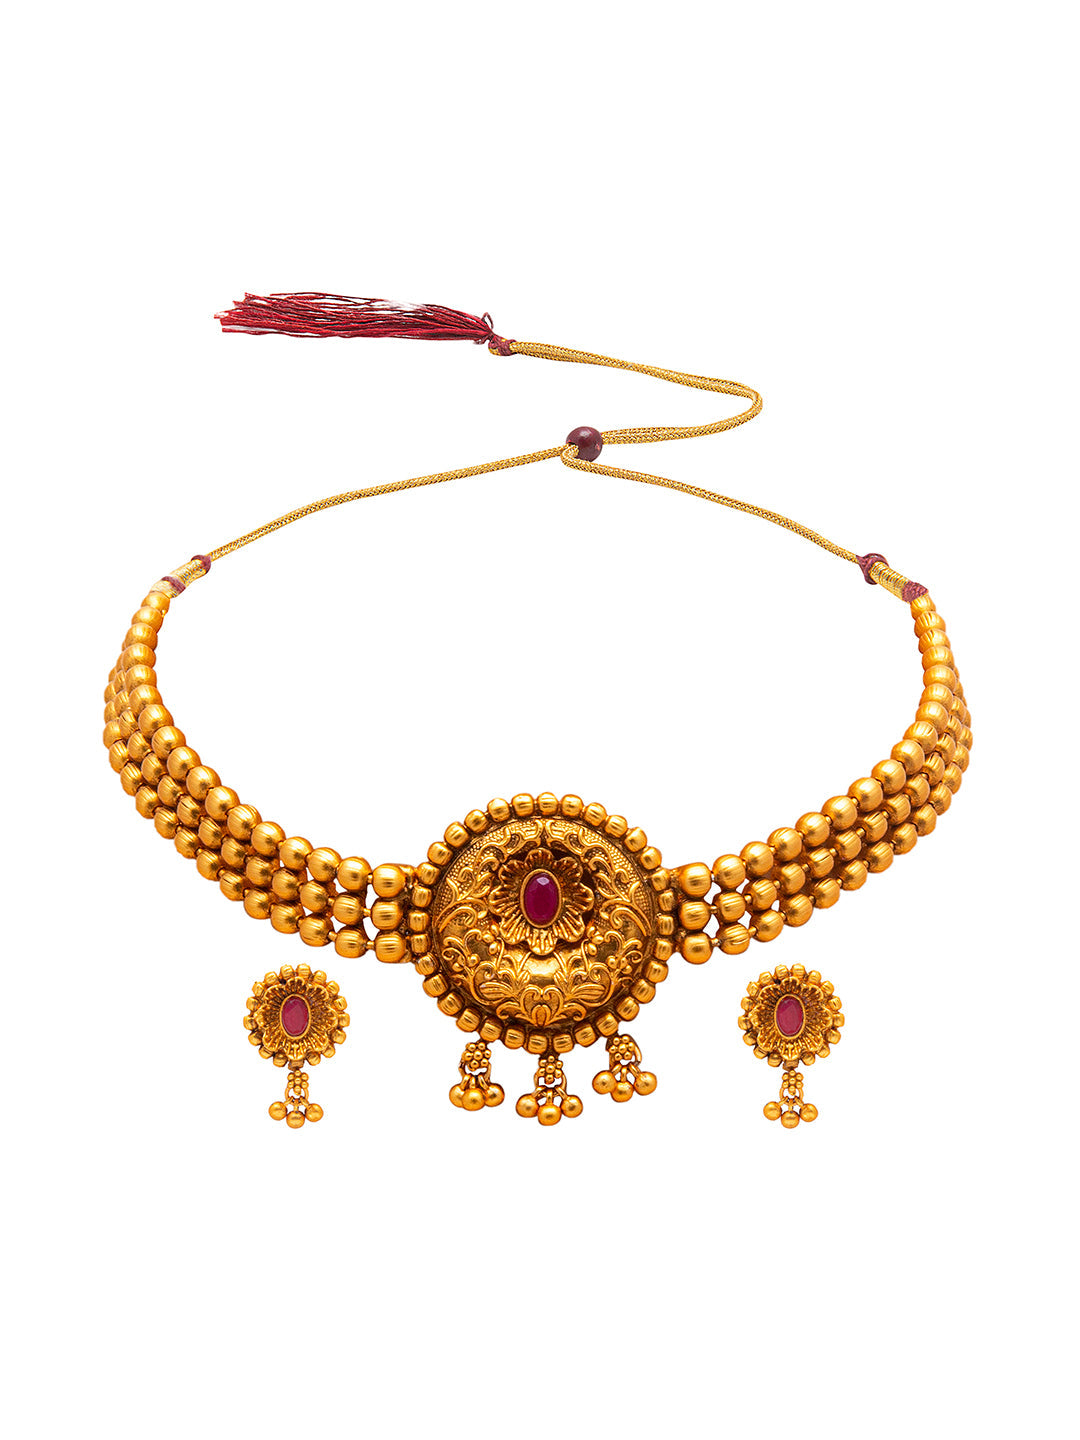 22K Gold Choker Necklaces -Indian Gold Jewelry -Buy Online